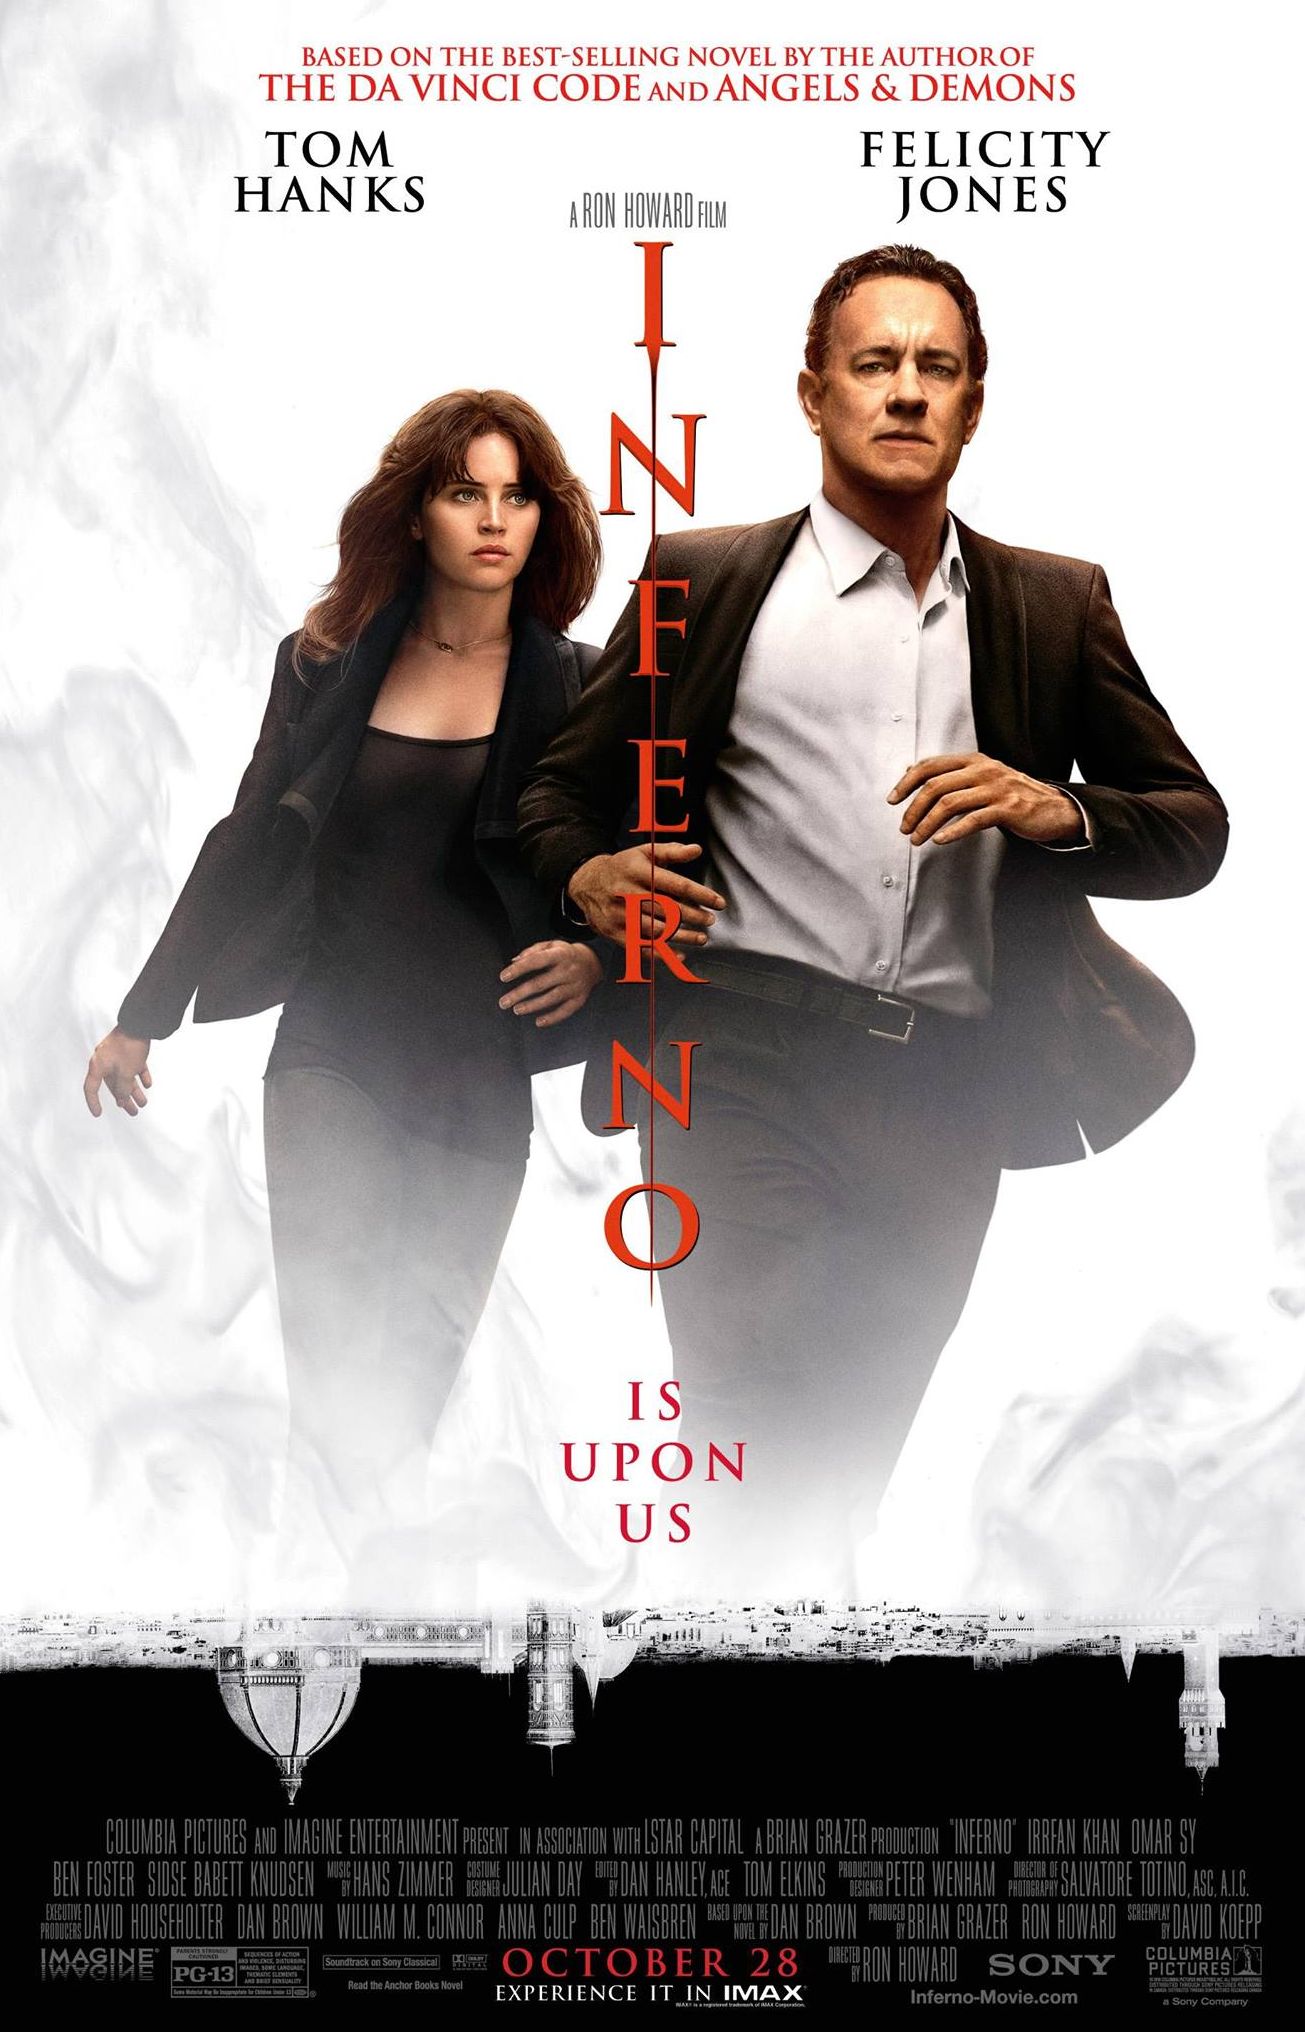 Tom Hanks is back for the latest poster promoting &#039;Inferno,&#039;